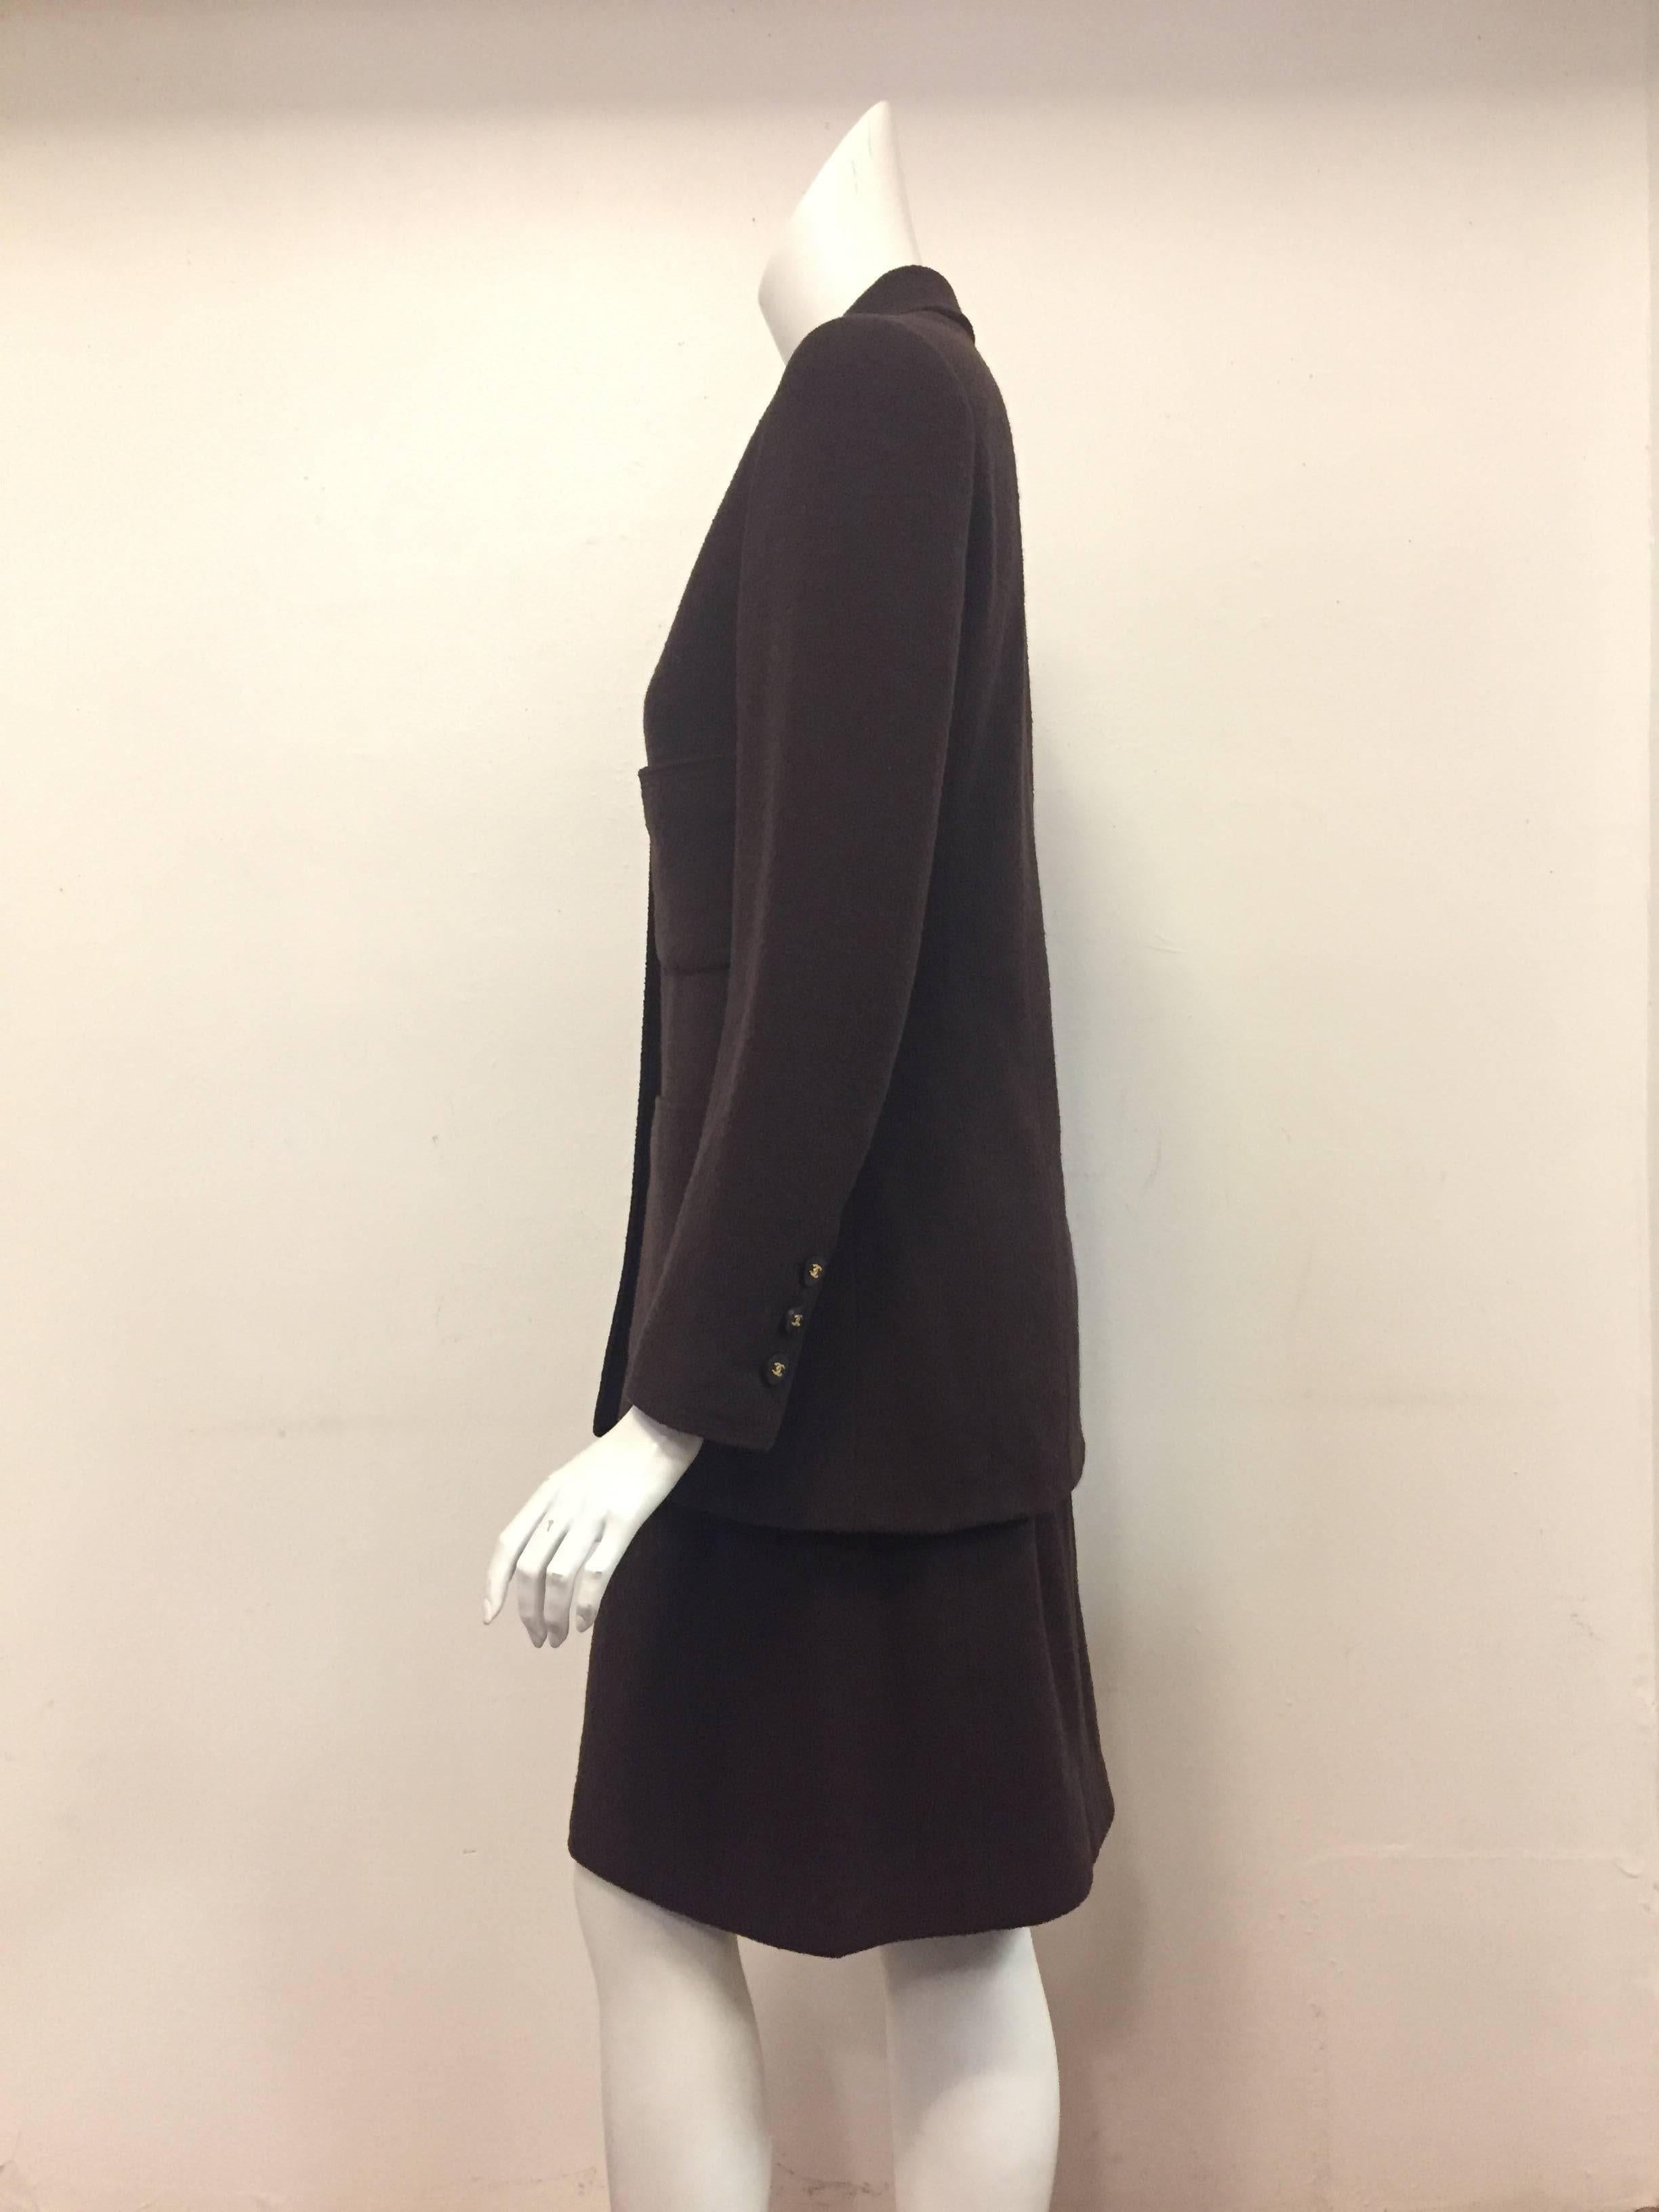 Chanel Boutique Chocolate Wool Blend Skirt Suit with Longer Length Jacket In Excellent Condition For Sale In Palm Beach, FL